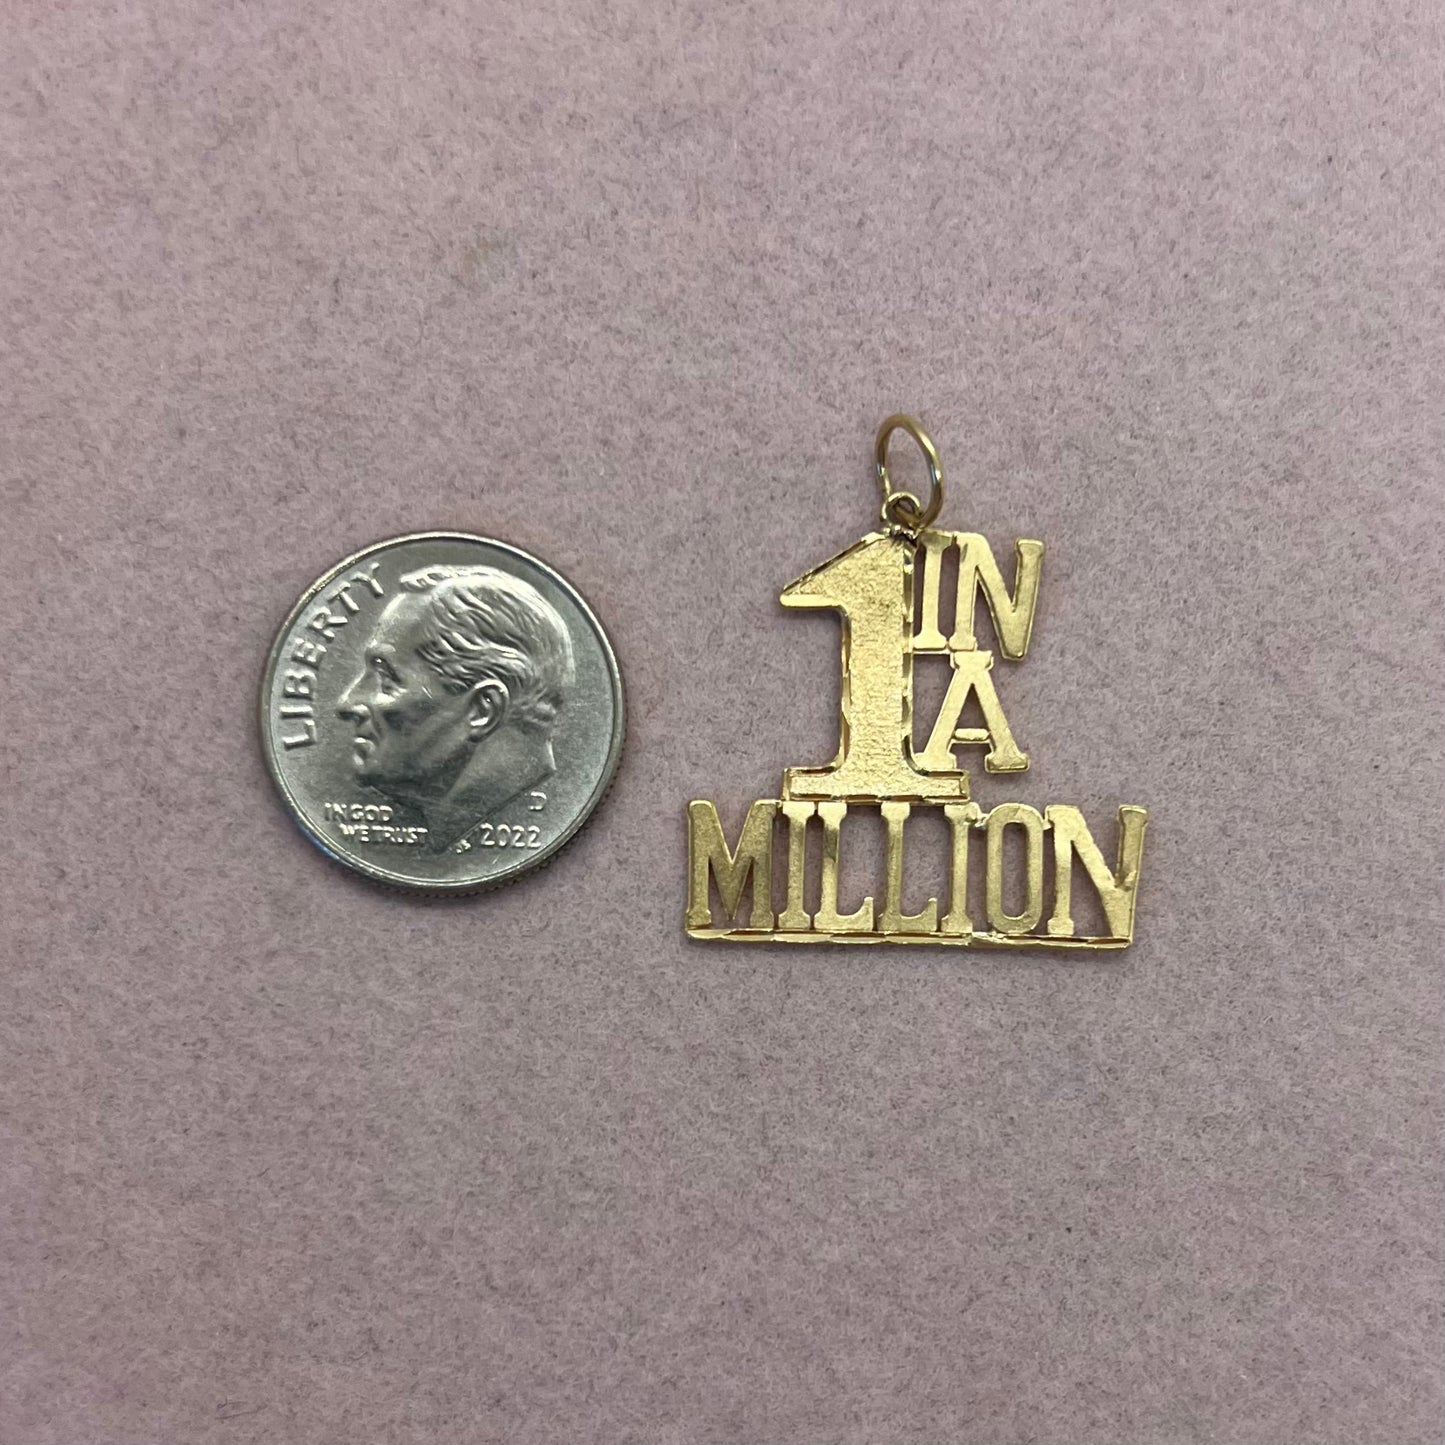 '1 in a Million' Pendant by Michael Anthony